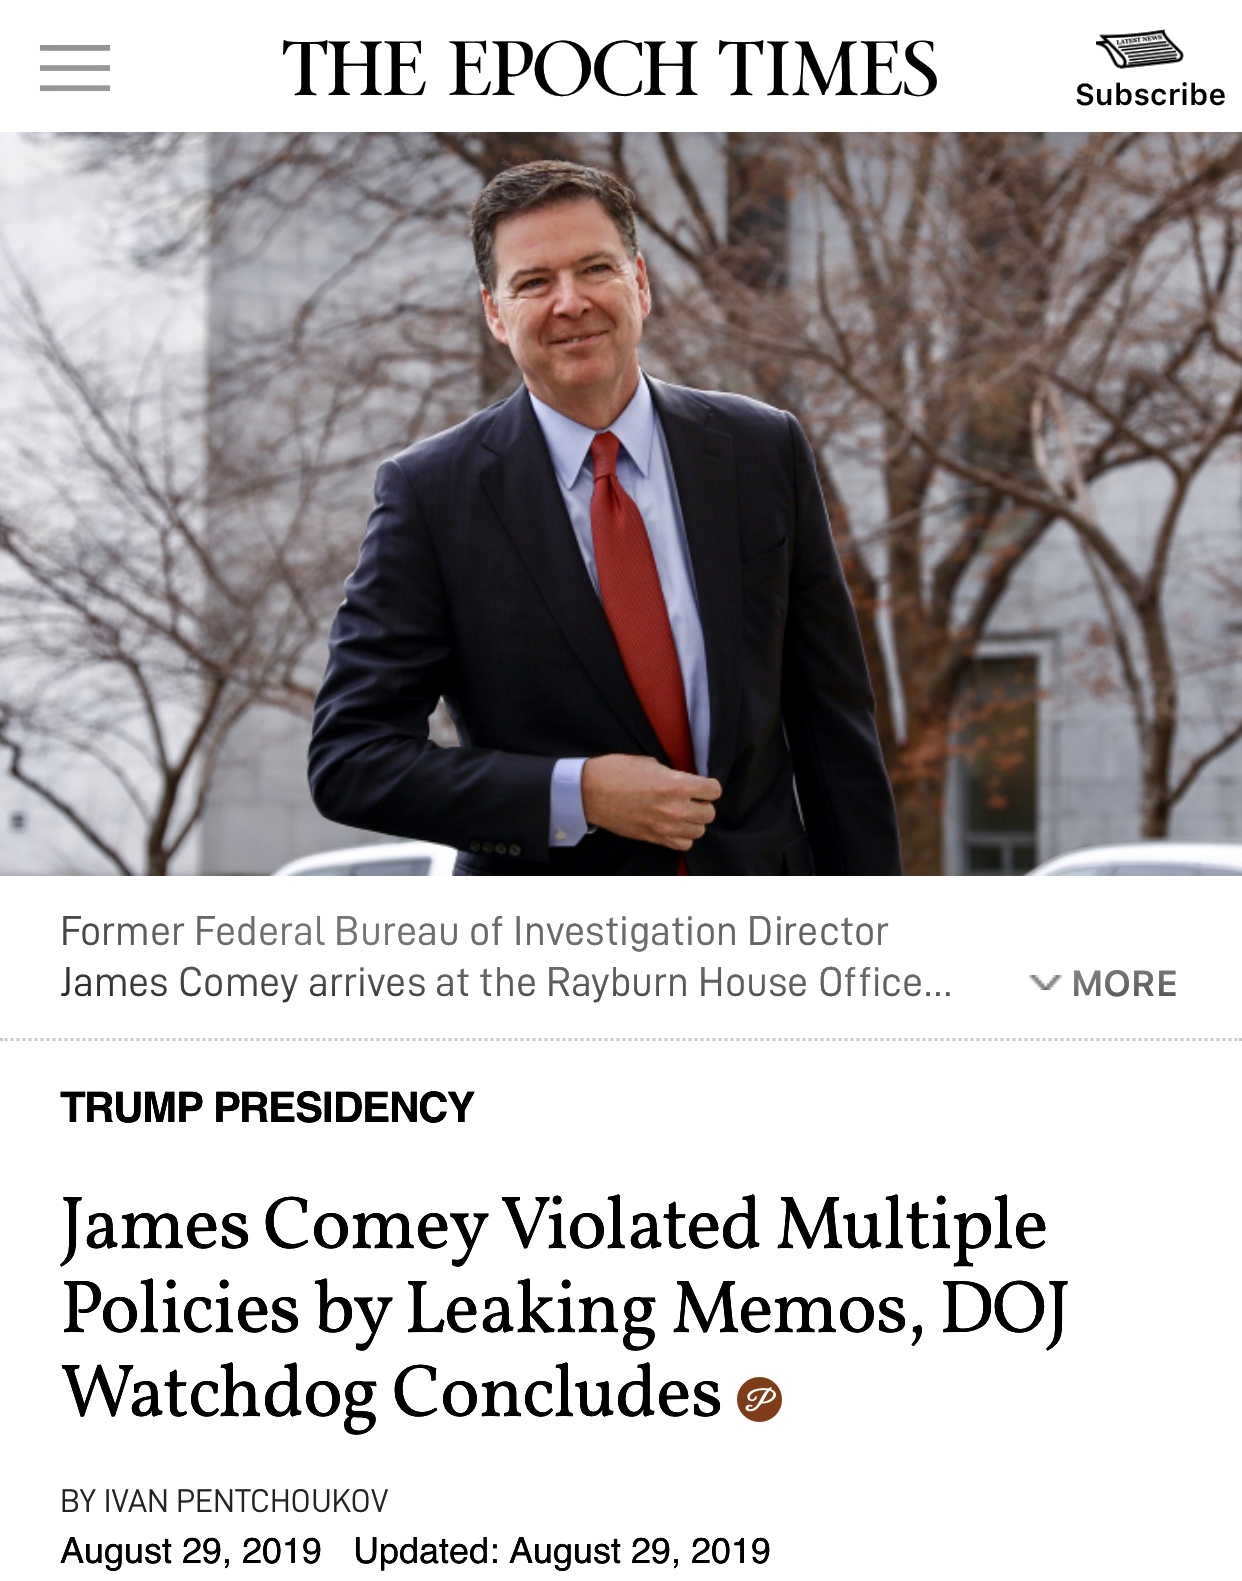 James Comey Violated Multiple Policies by Leaking Memos, DOJ Watchdog Concludes